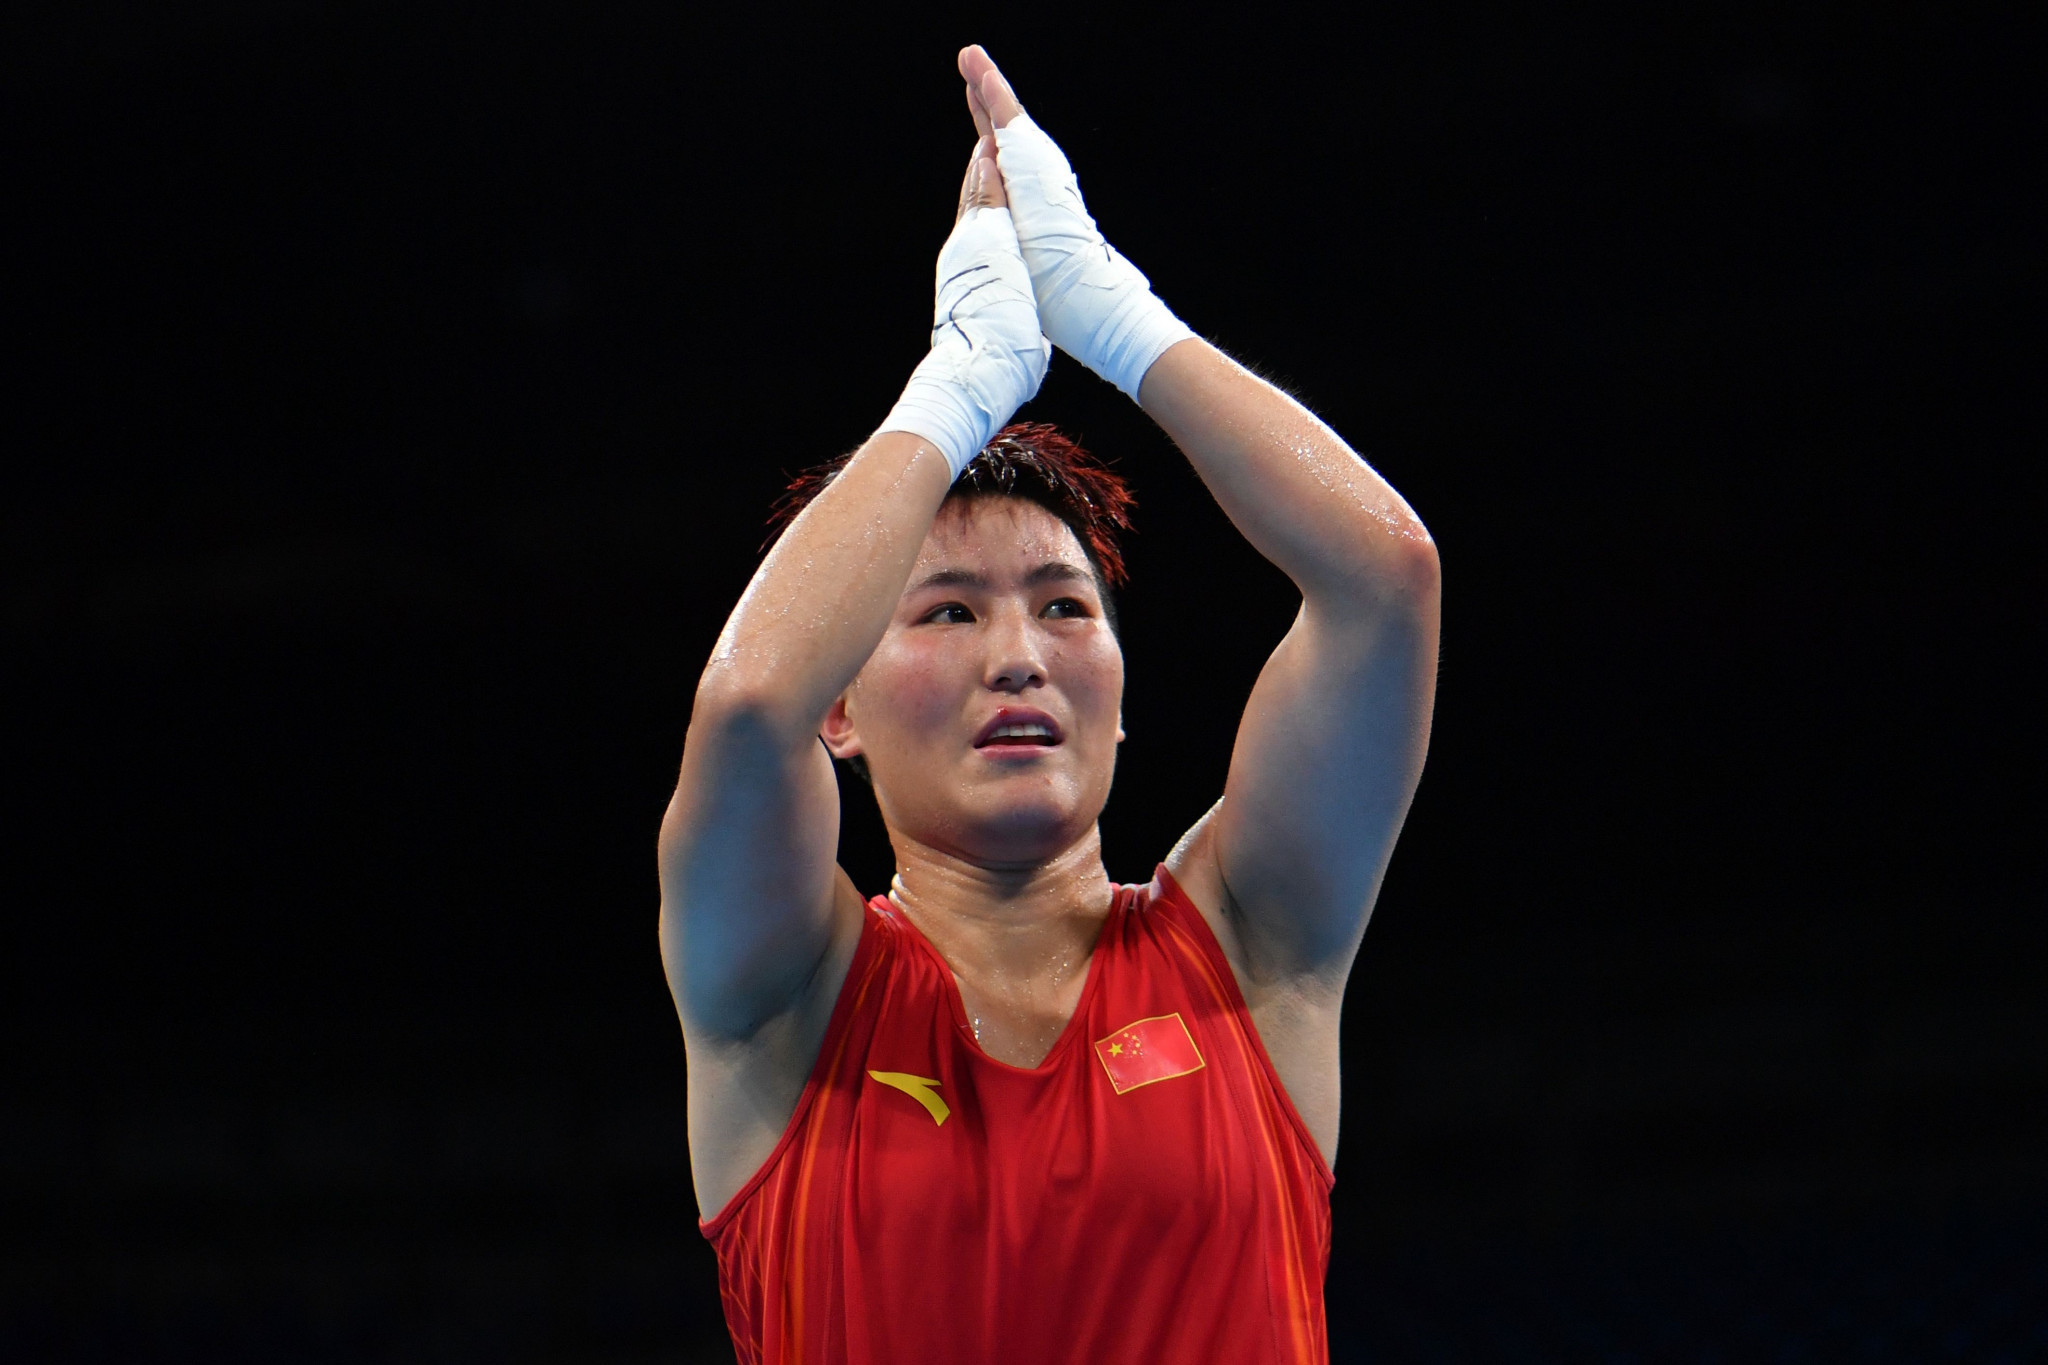 Rio 2016 silver medallist Yin Junhua is through to the featherweight semi-finals at the Asian Women's Boxing Championships in Ho Chi Minh City in Vietnam ©Getty Images